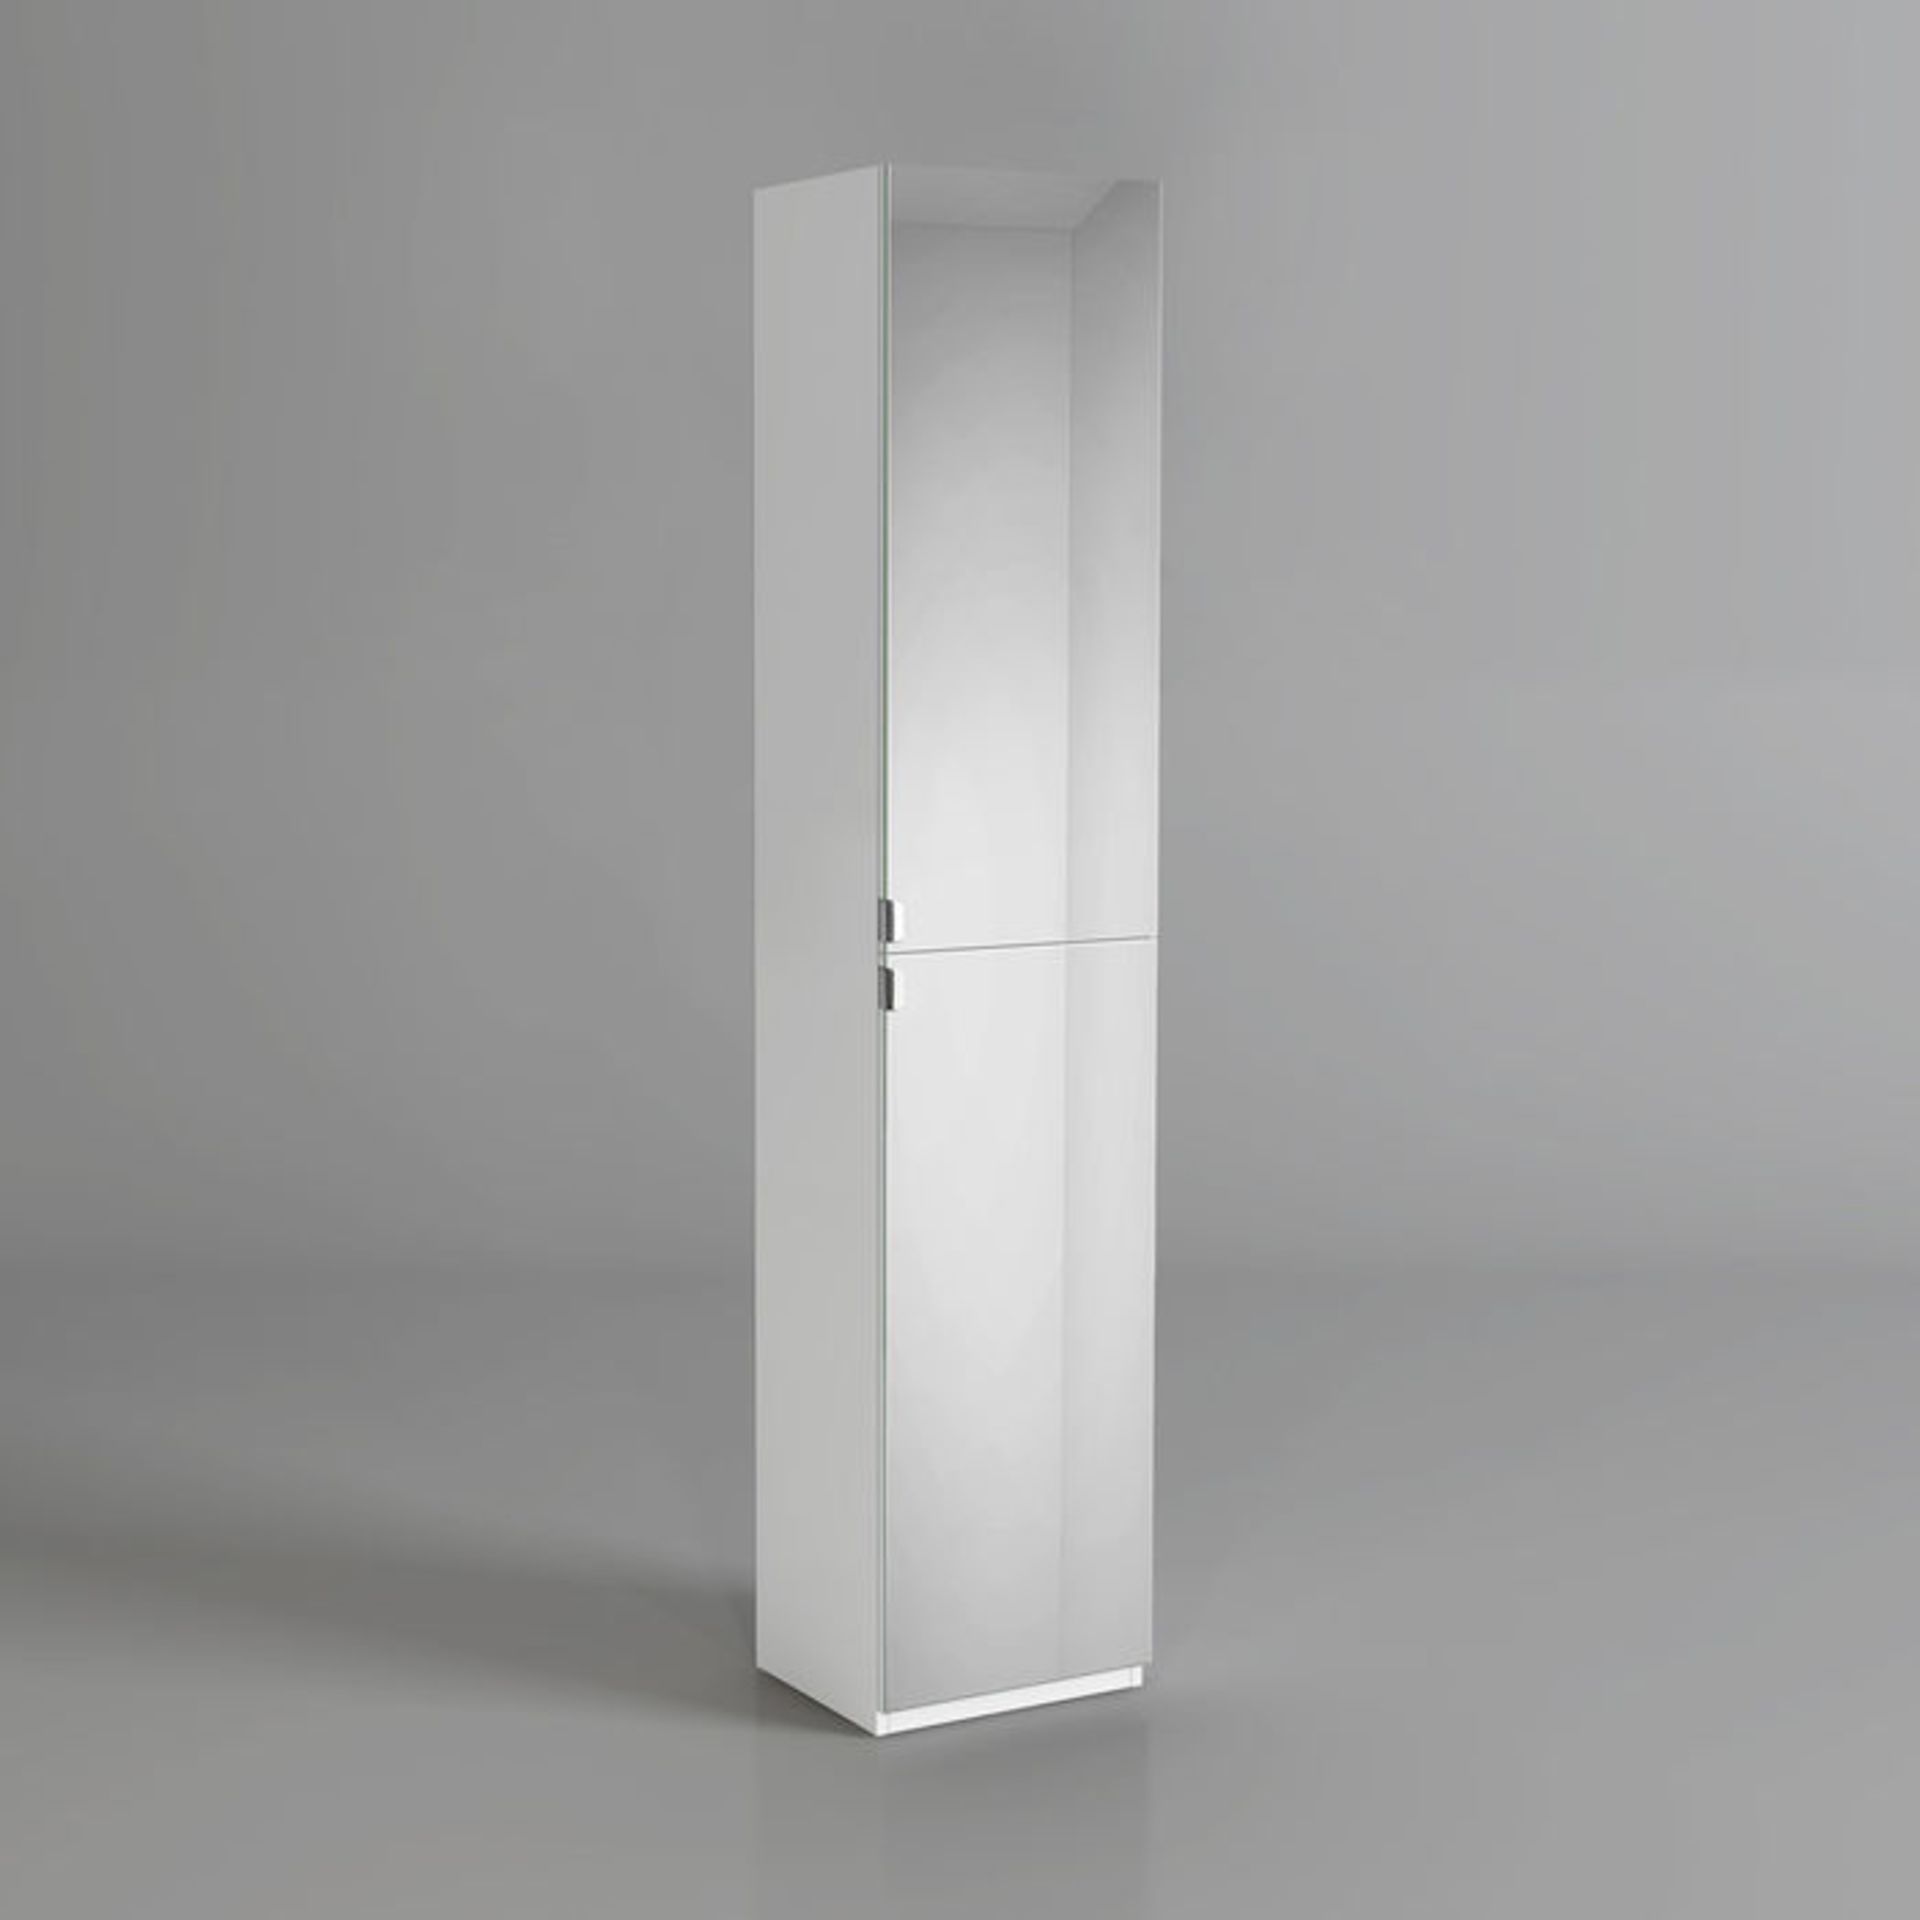 (NY183) 1700x350mm Mirrored Door Matte White Tall Storage Cabinet - Floor Standing. Enjoy the - Image 4 of 4